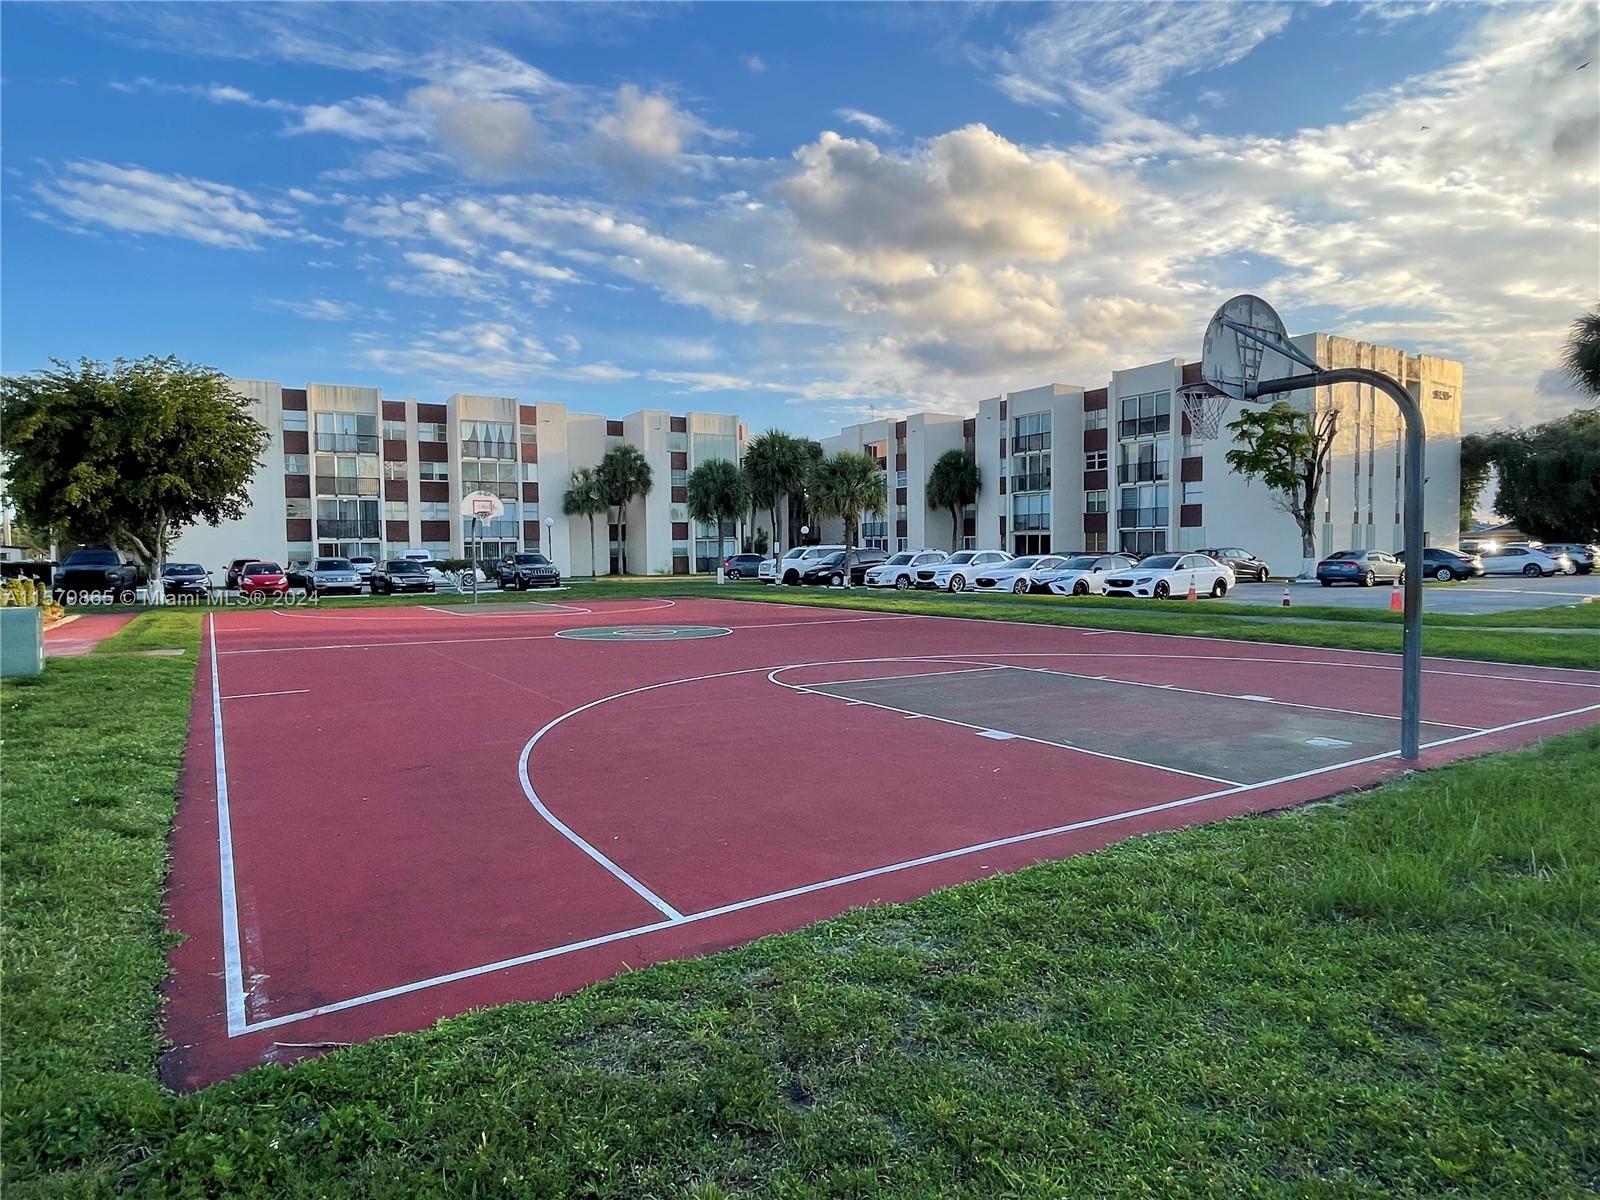 a view of a basketball court